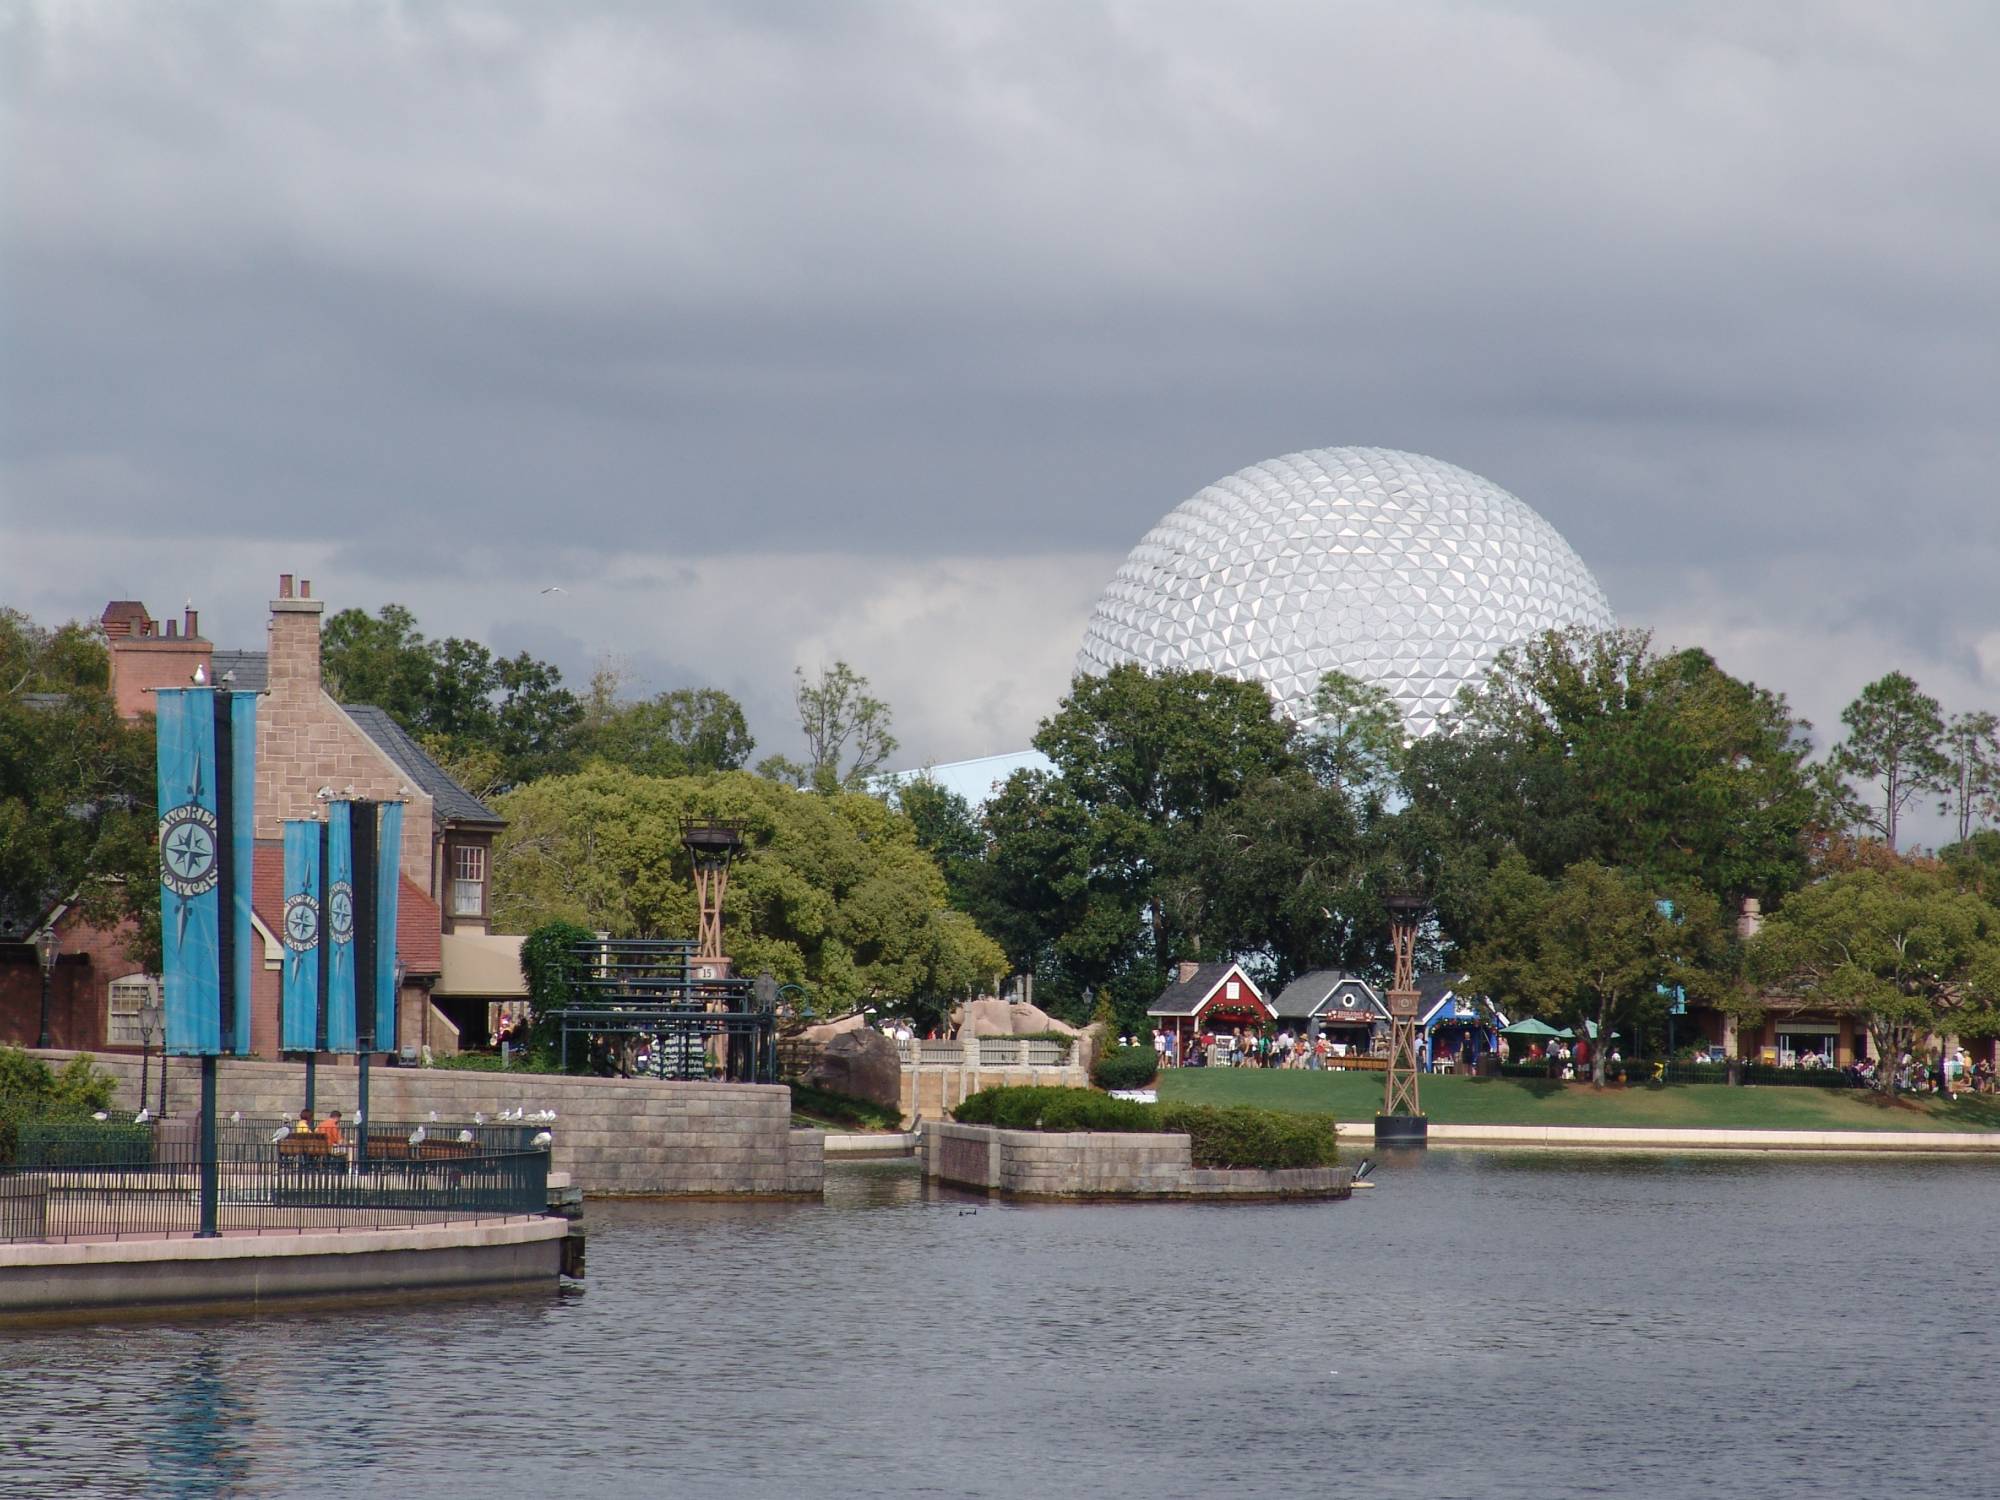 Epcot - Spaceship Earth from World Showcase